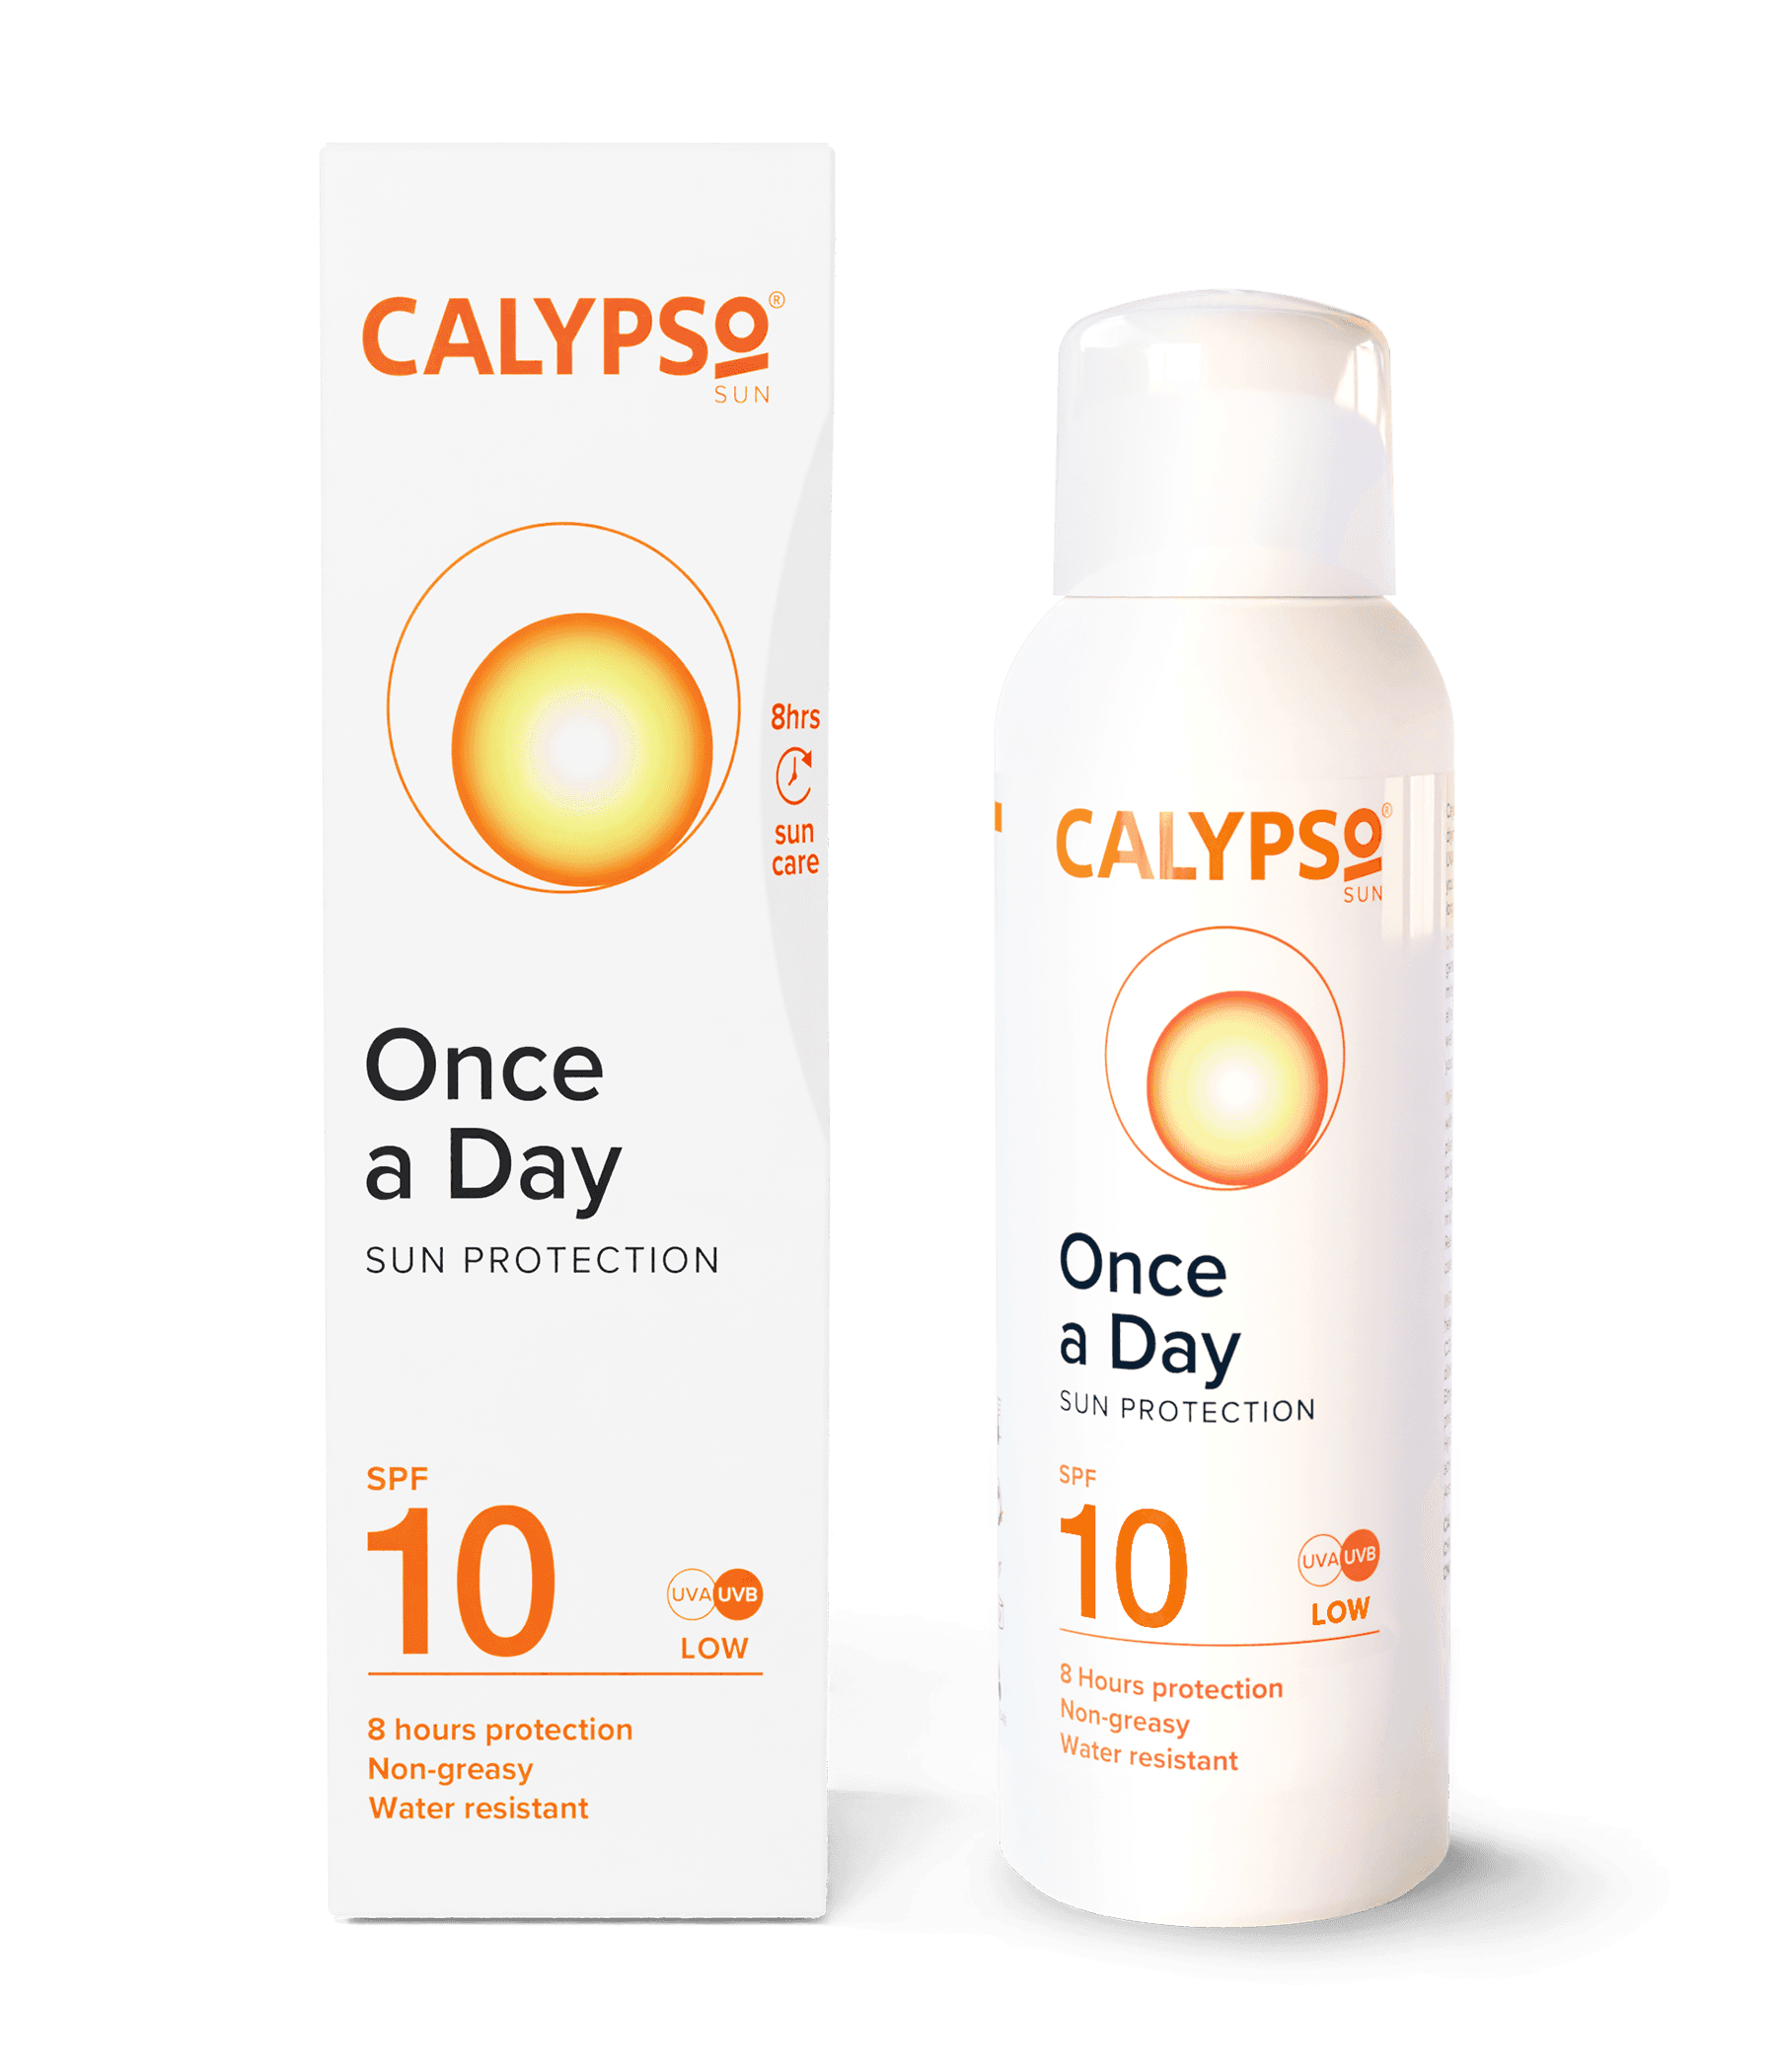 Calypso Once a day SPF10 Sun lotion Bottle and Box